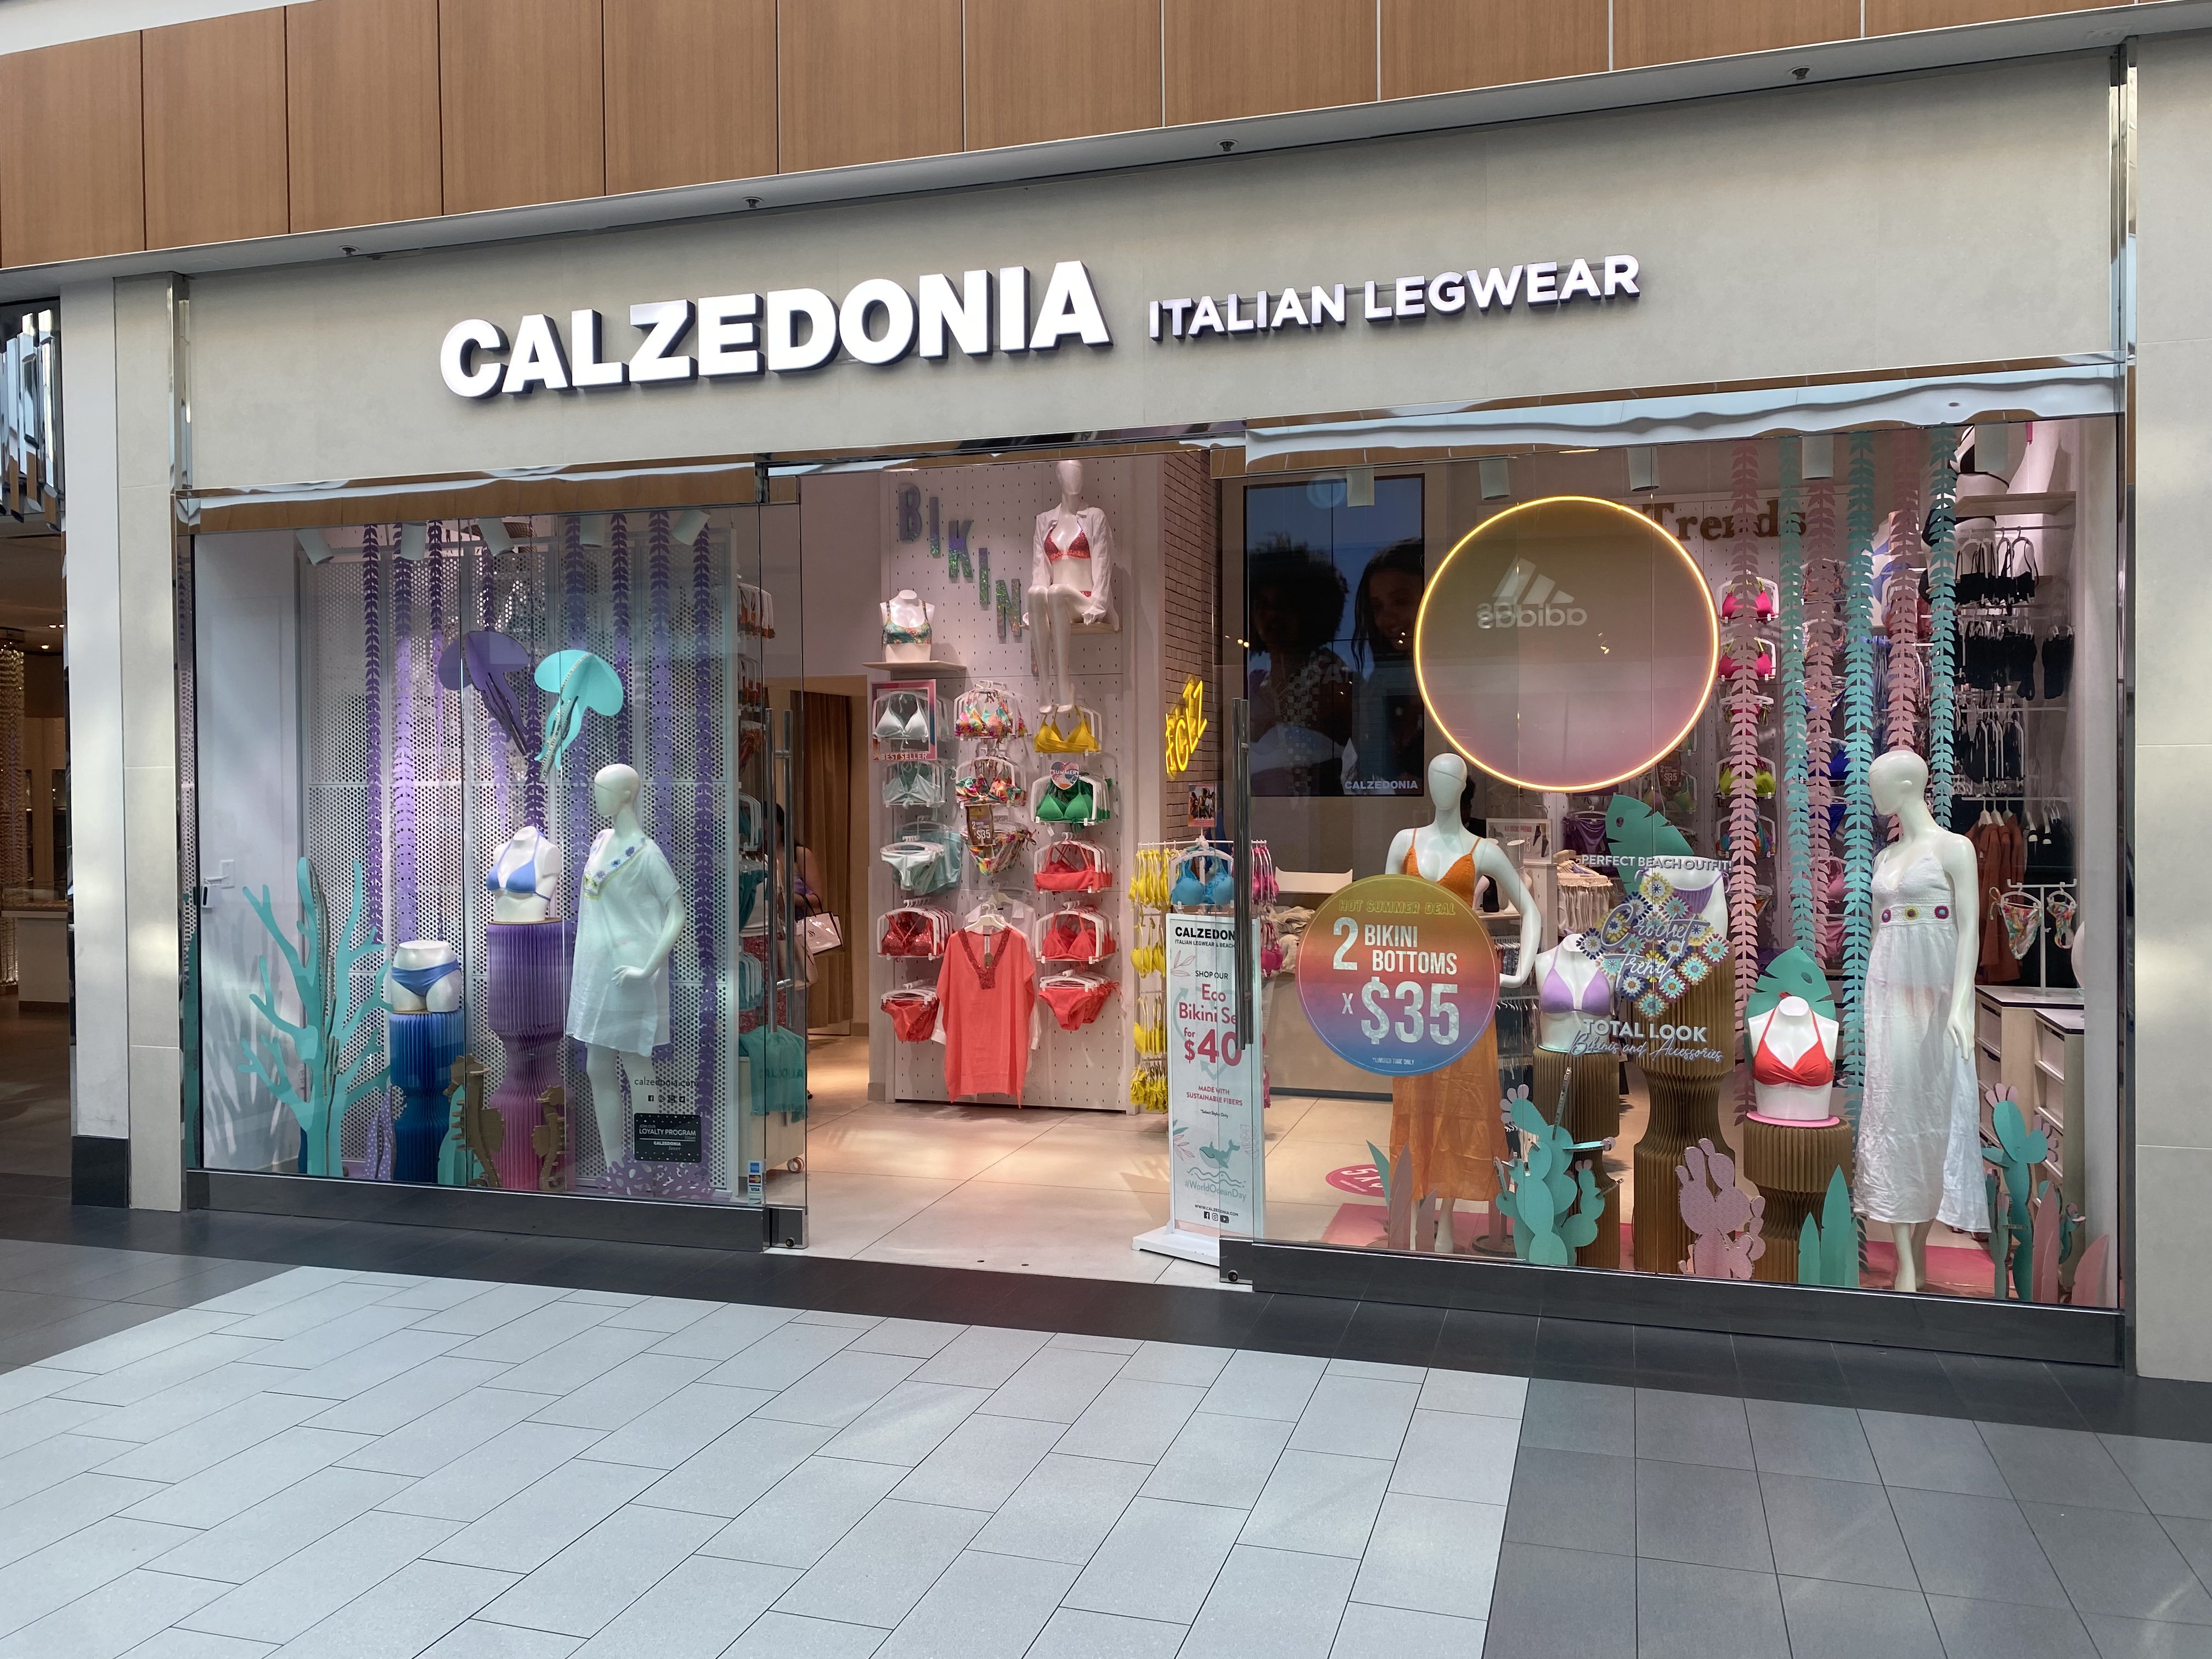 Bepalen Springen Parel Hosiery and swimsuits store in Garden City at 630, Old Country Rd. |  Calzedonia